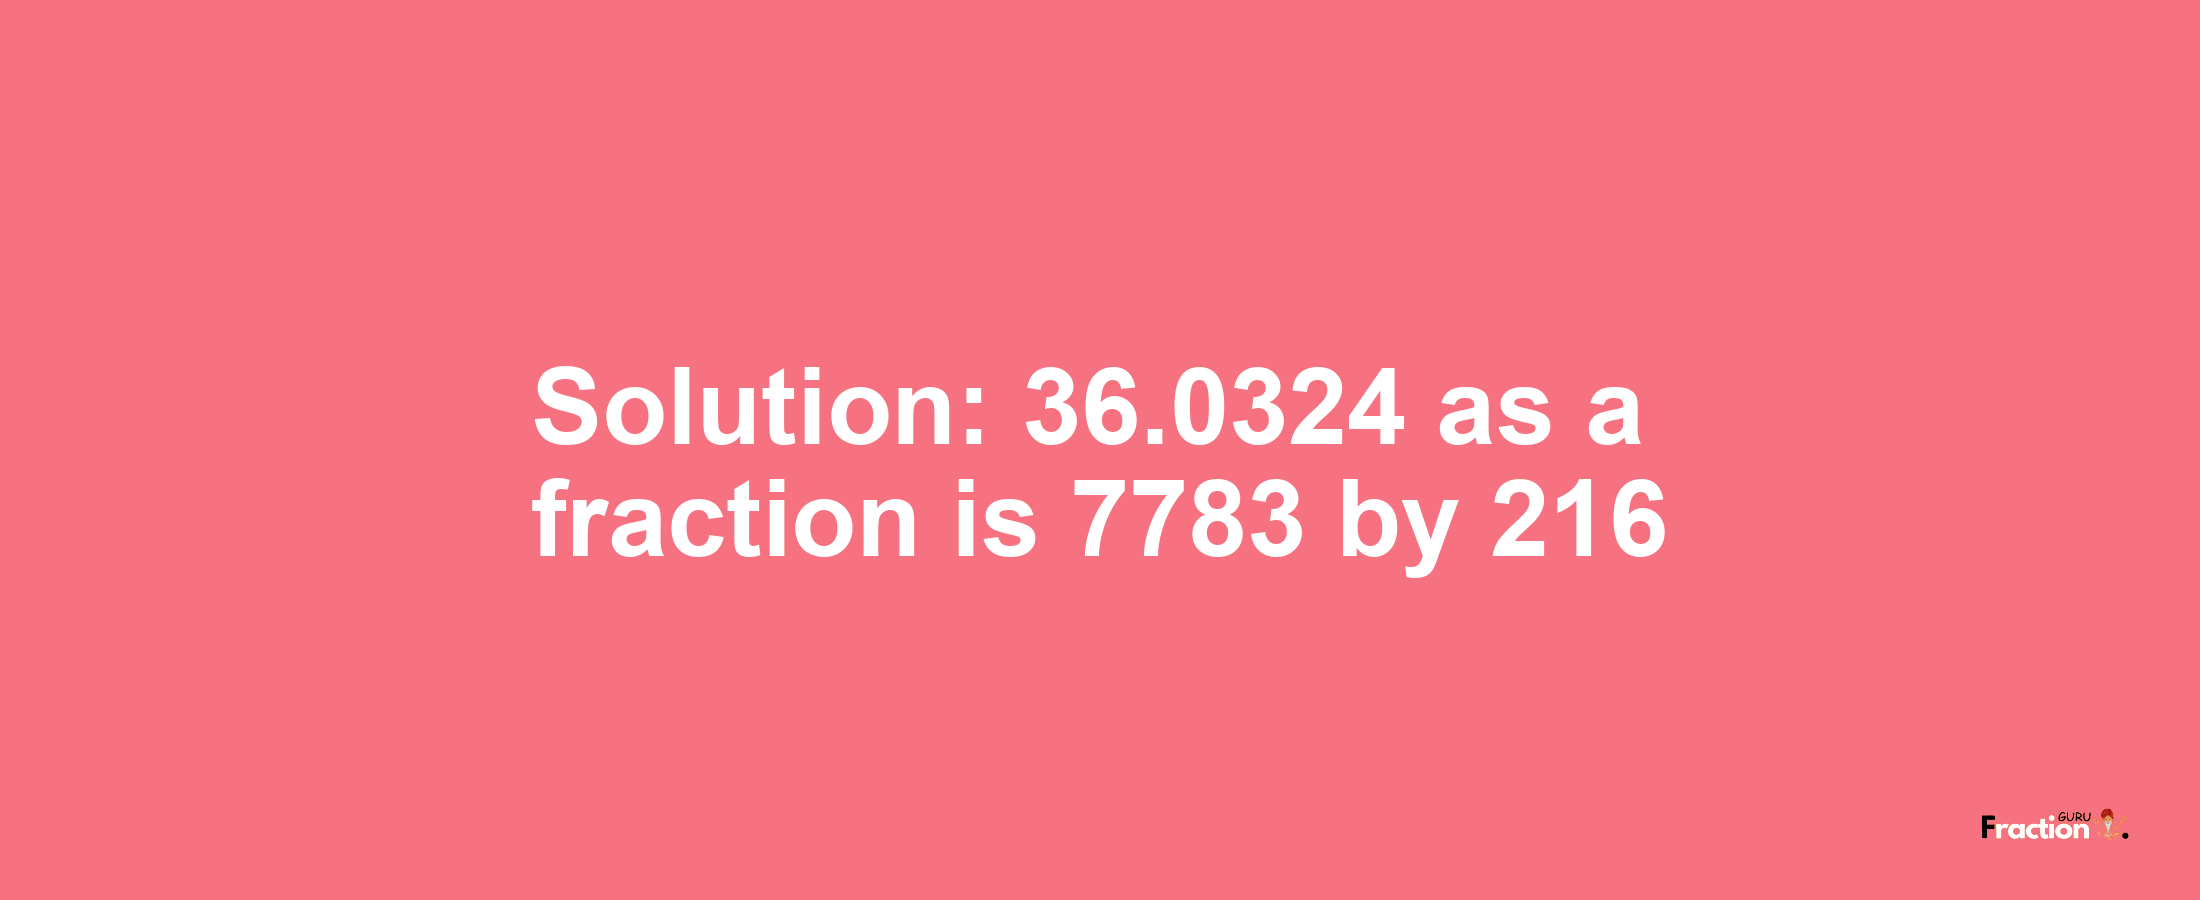 Solution:36.0324 as a fraction is 7783/216